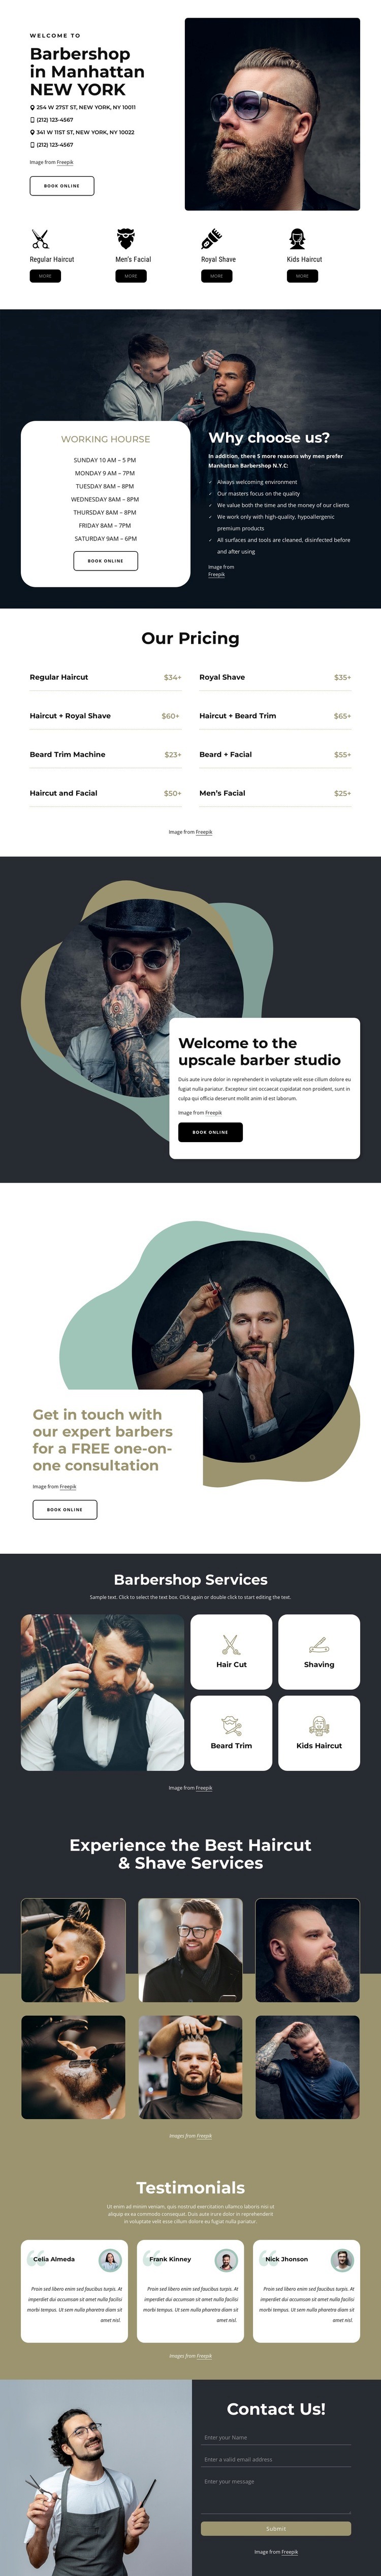 Hight quality grooming services Homepage Design